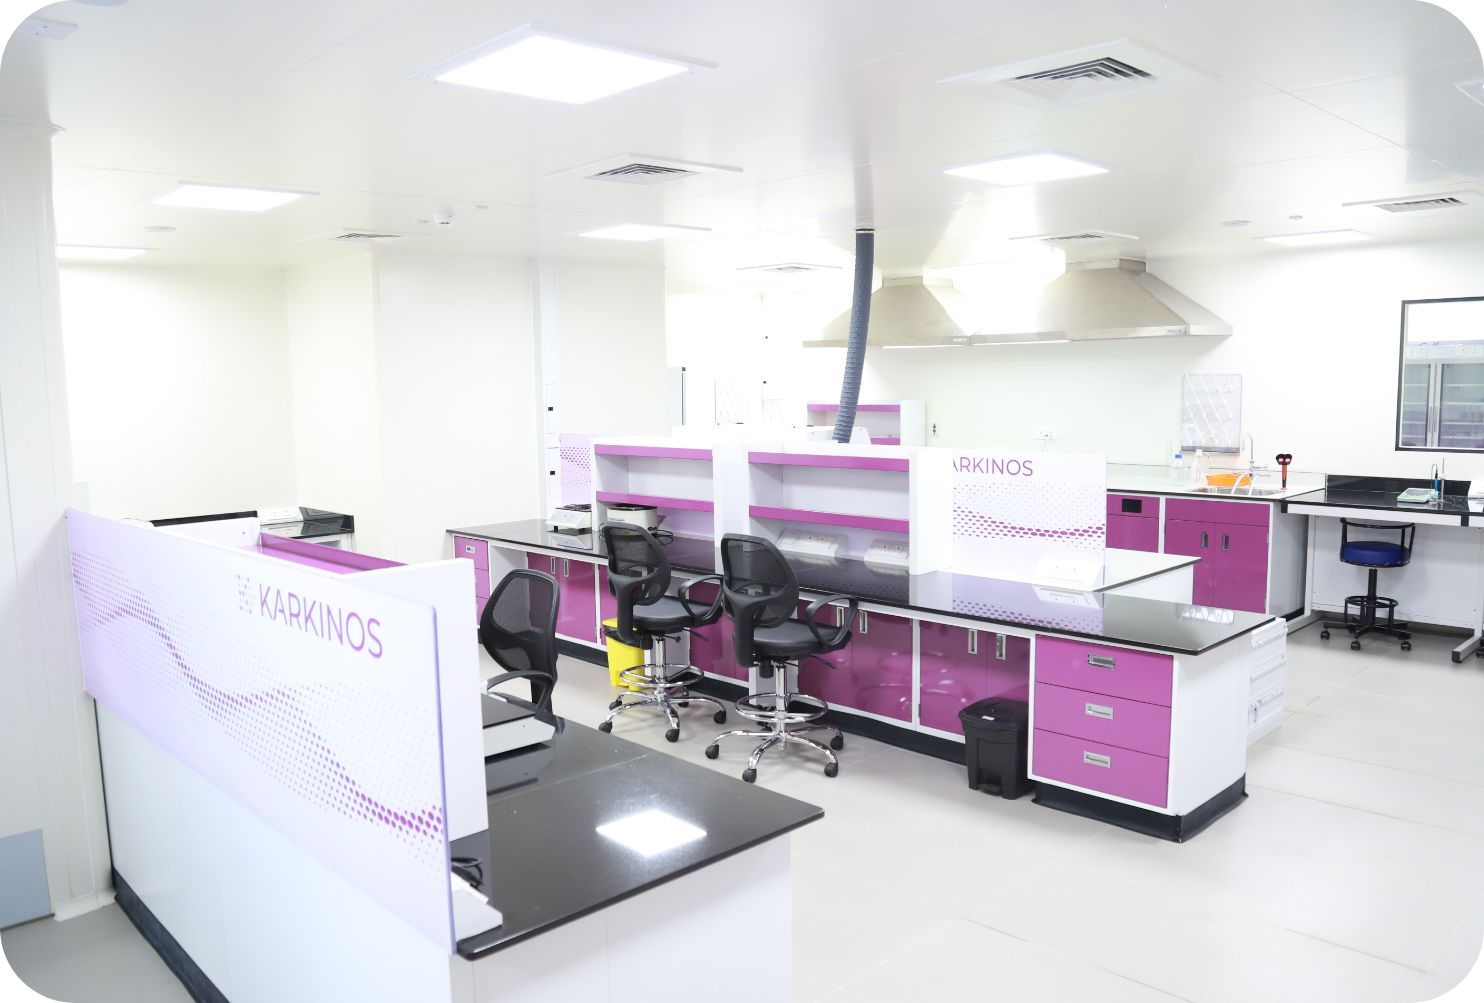 Karkinos Healthcare establishes India’s first oncology laboratory for comprehensive cancer diagnostic services